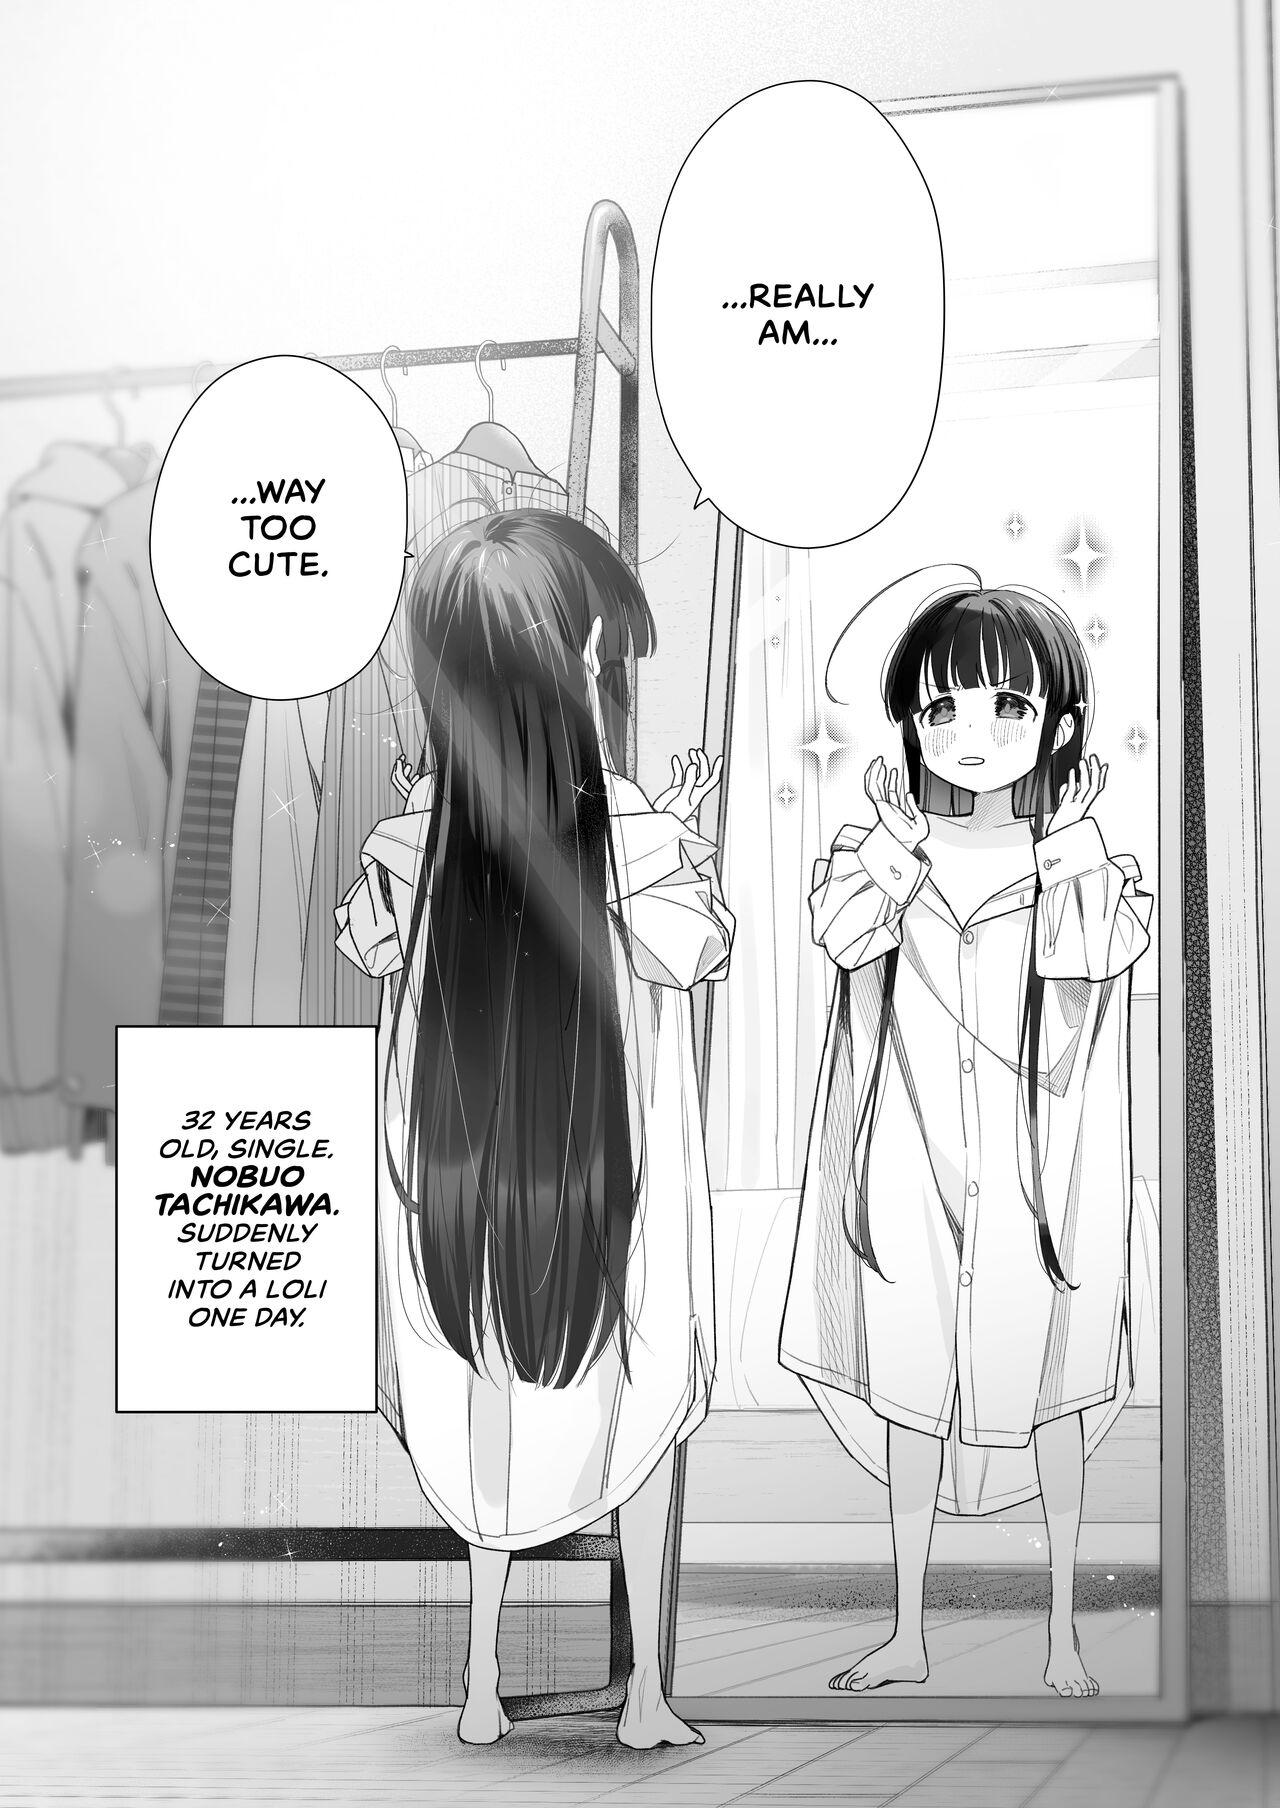 Argentina [Asunaro Neat. (Ronna)] TS Loli Oji-san no Bouken Onanie Hen | The Adventures of an Old Man Who Was Gender-Swapped Into a Loli ~Masturbation Chapter~ [English] [CulturedCommissions] [Digital] - Original Facial Cumshot - Page 3